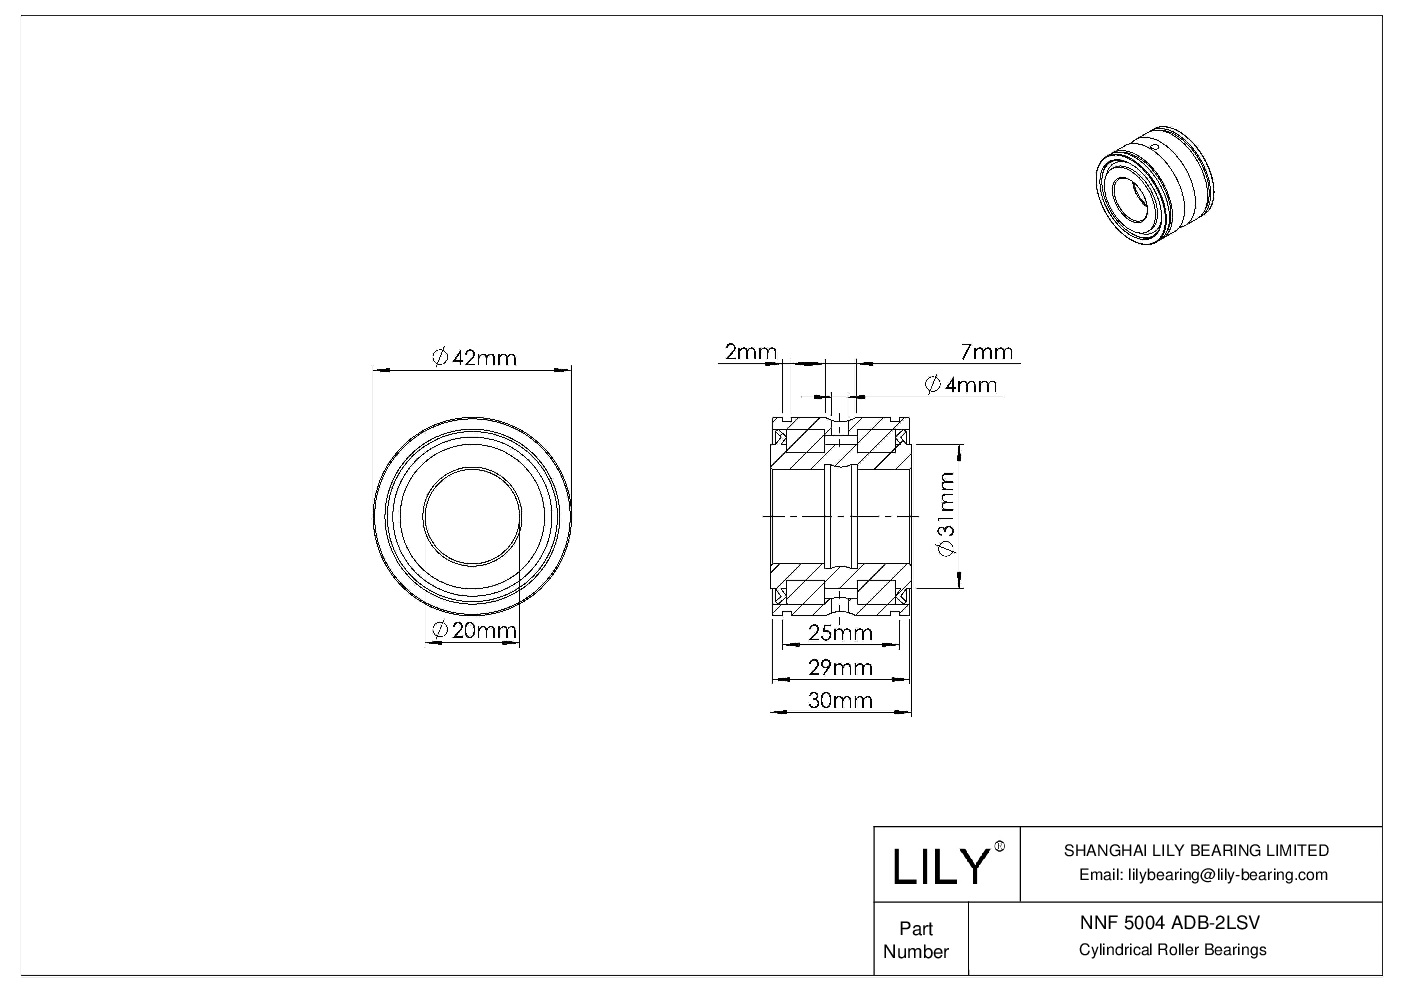 NNF 5004 ADB-2LSV Double Row Full Complement Cylindrical Roller Bearings cad drawing